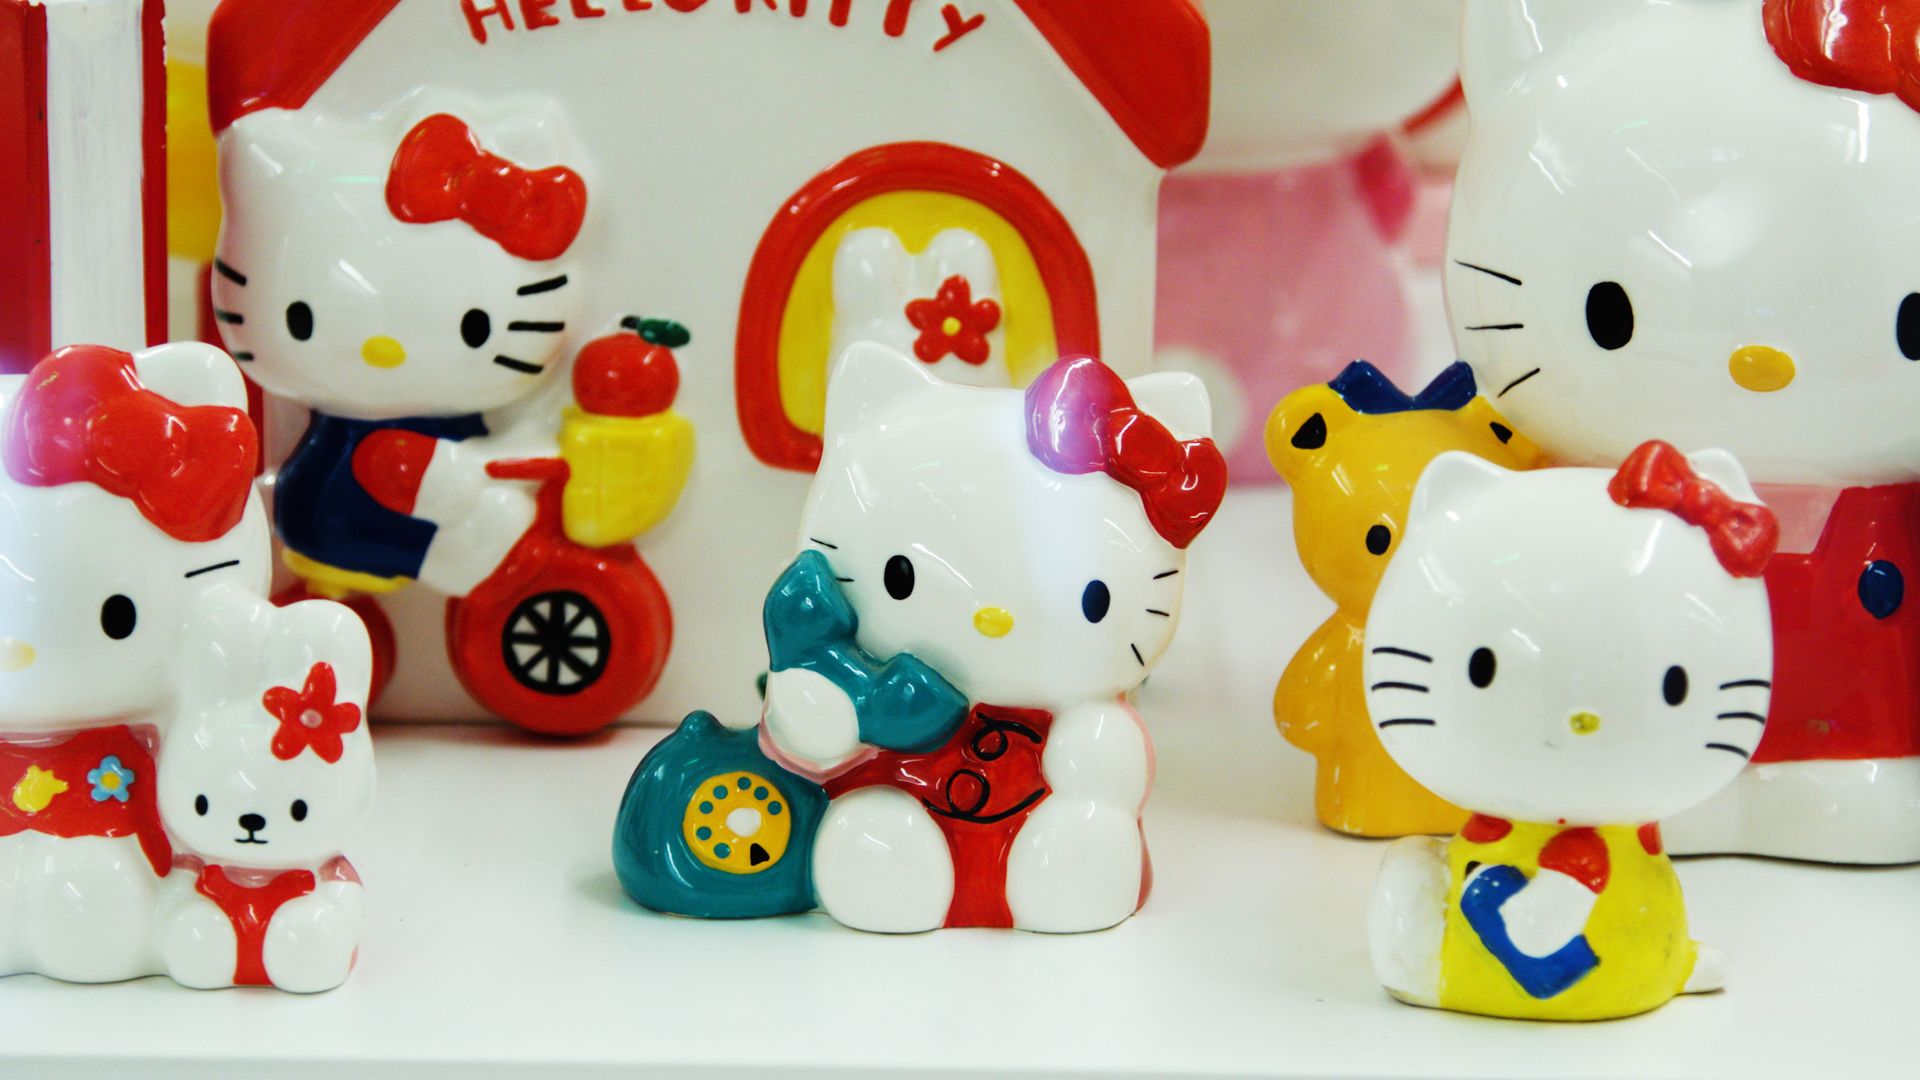 Sanrio Is Opening Their First-Ever Hello Kitty Cafe